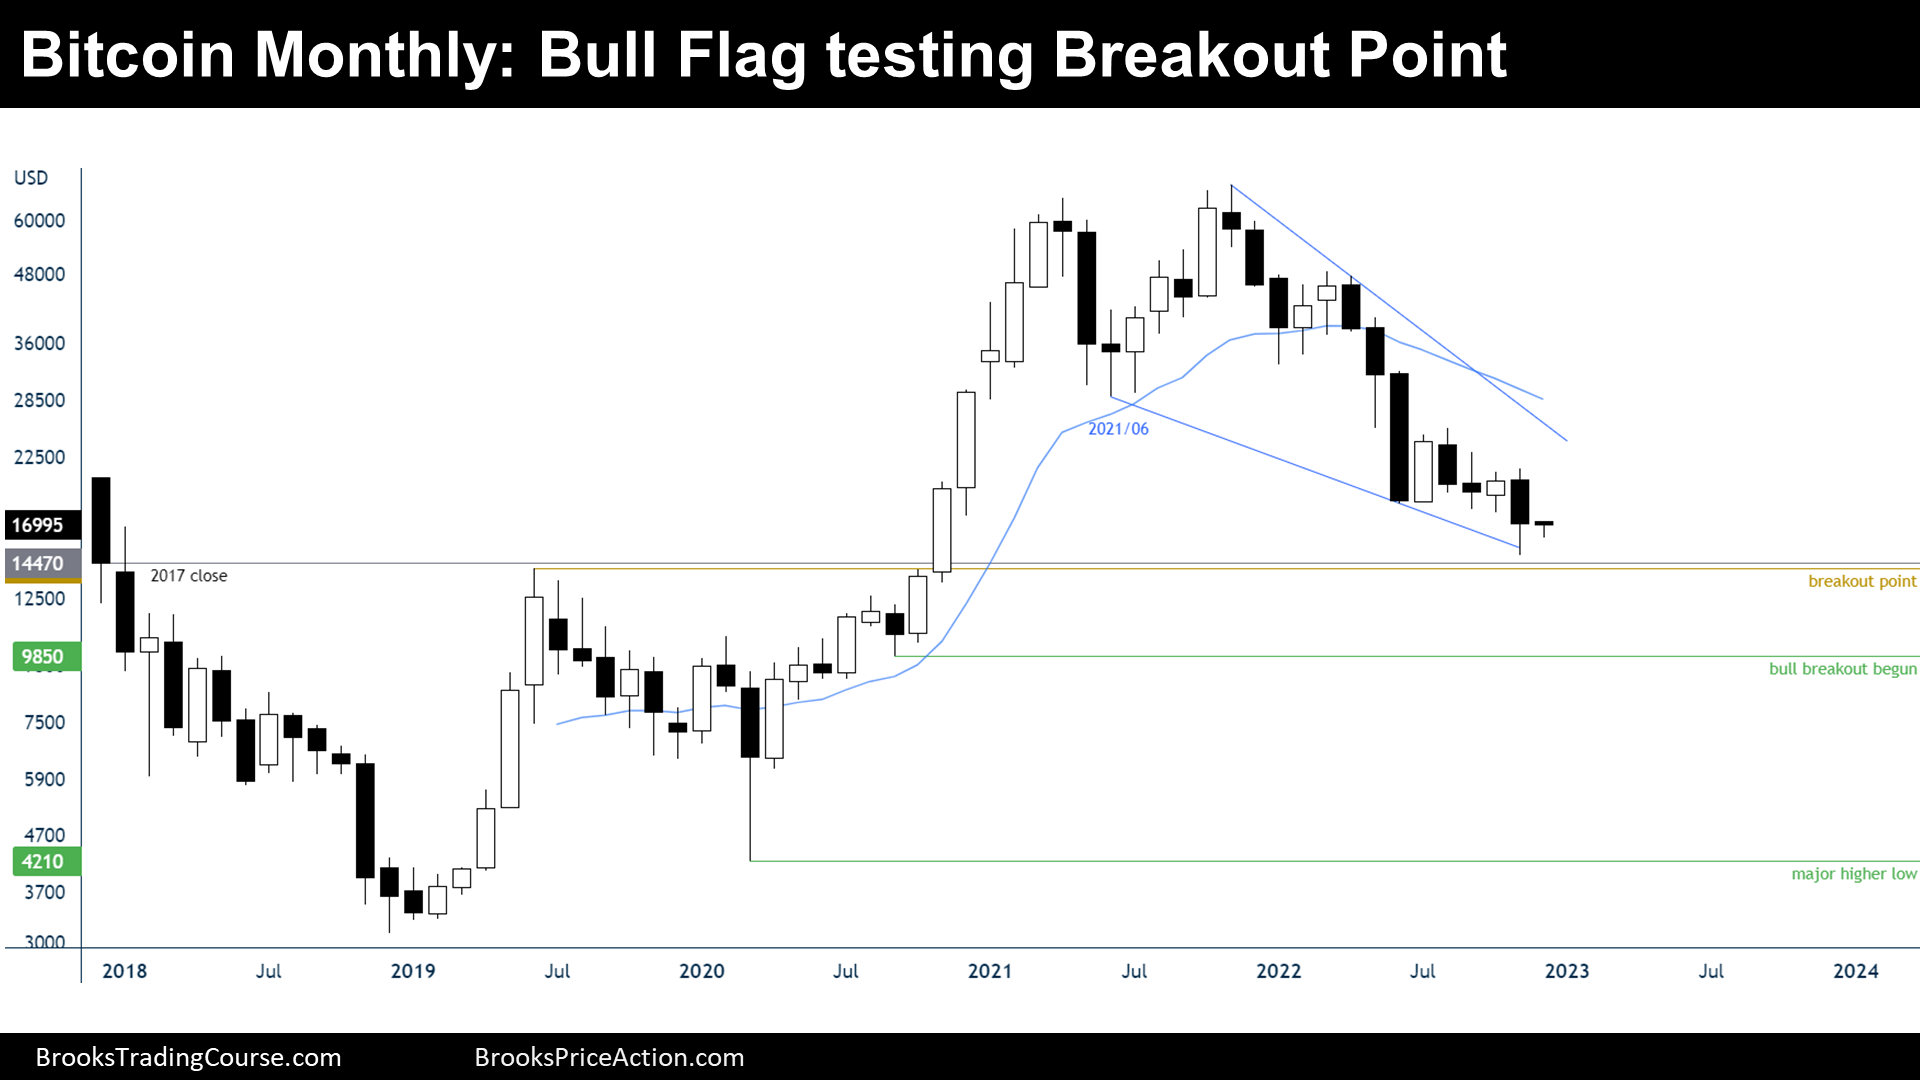 Bitcoin testing major breakout point, bull flag on monthly chart